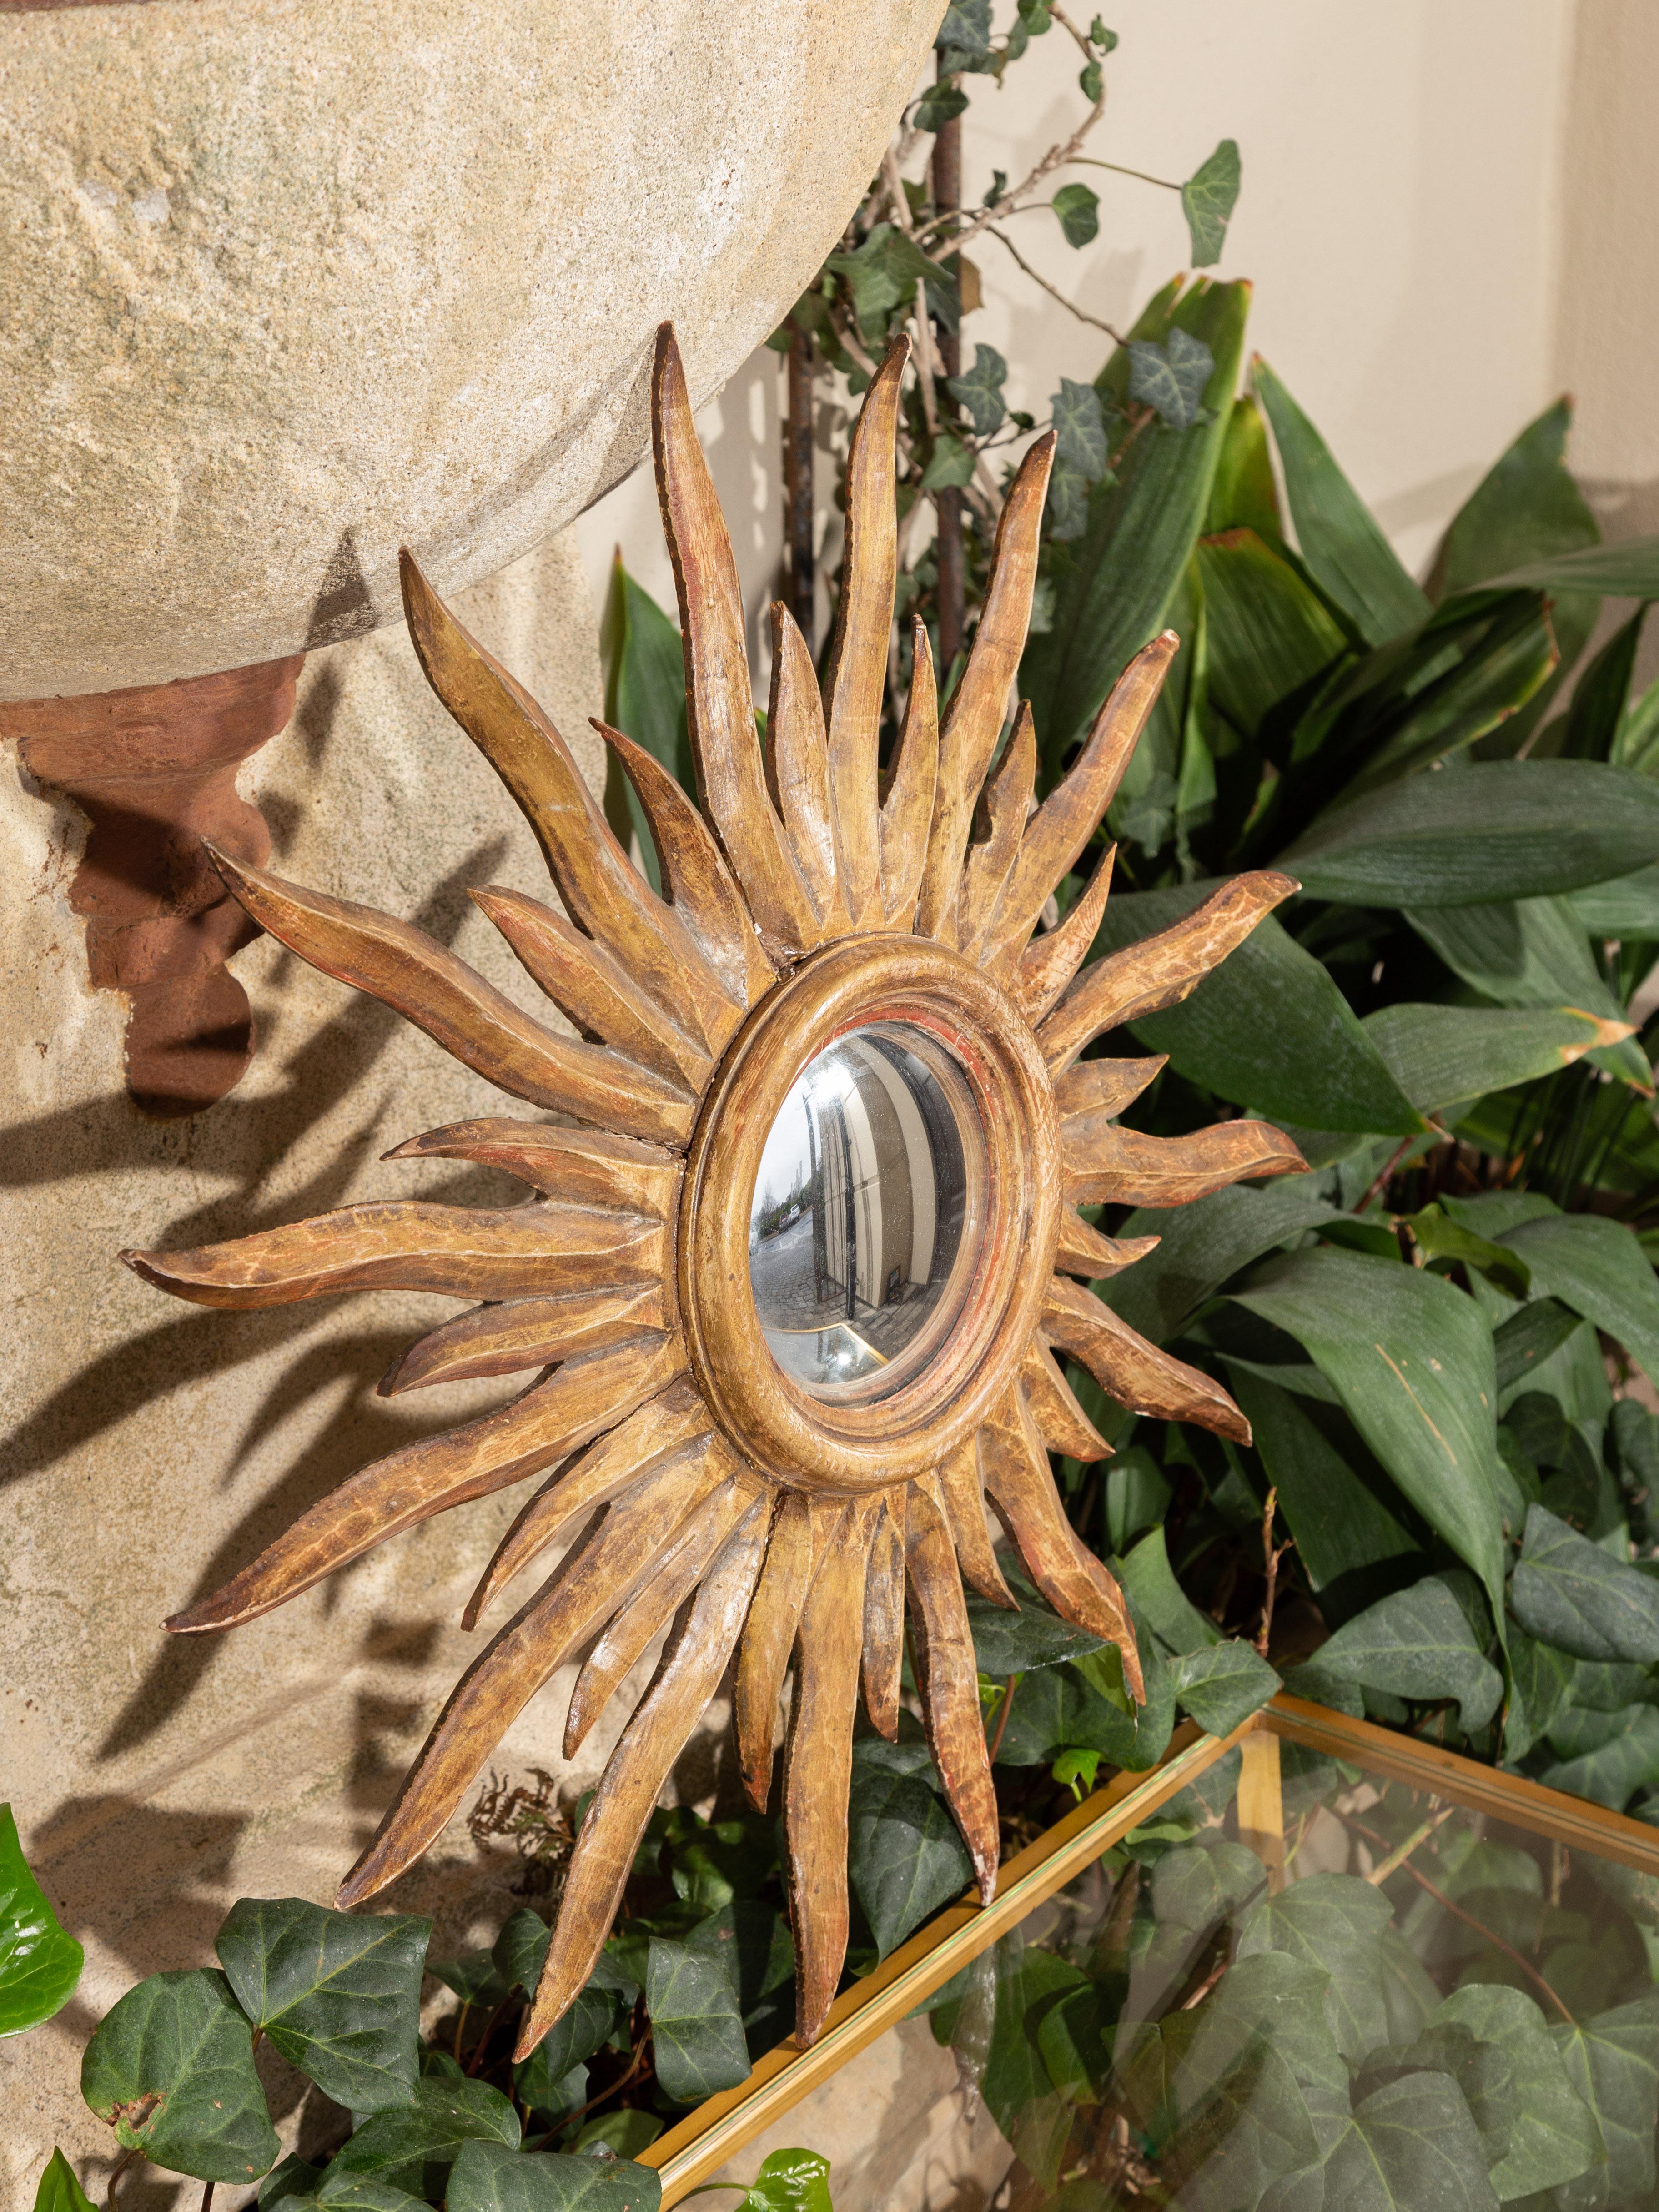 French Midcentury Sunburst Mirror with Convex Glass and Wavy Sun Rays 1